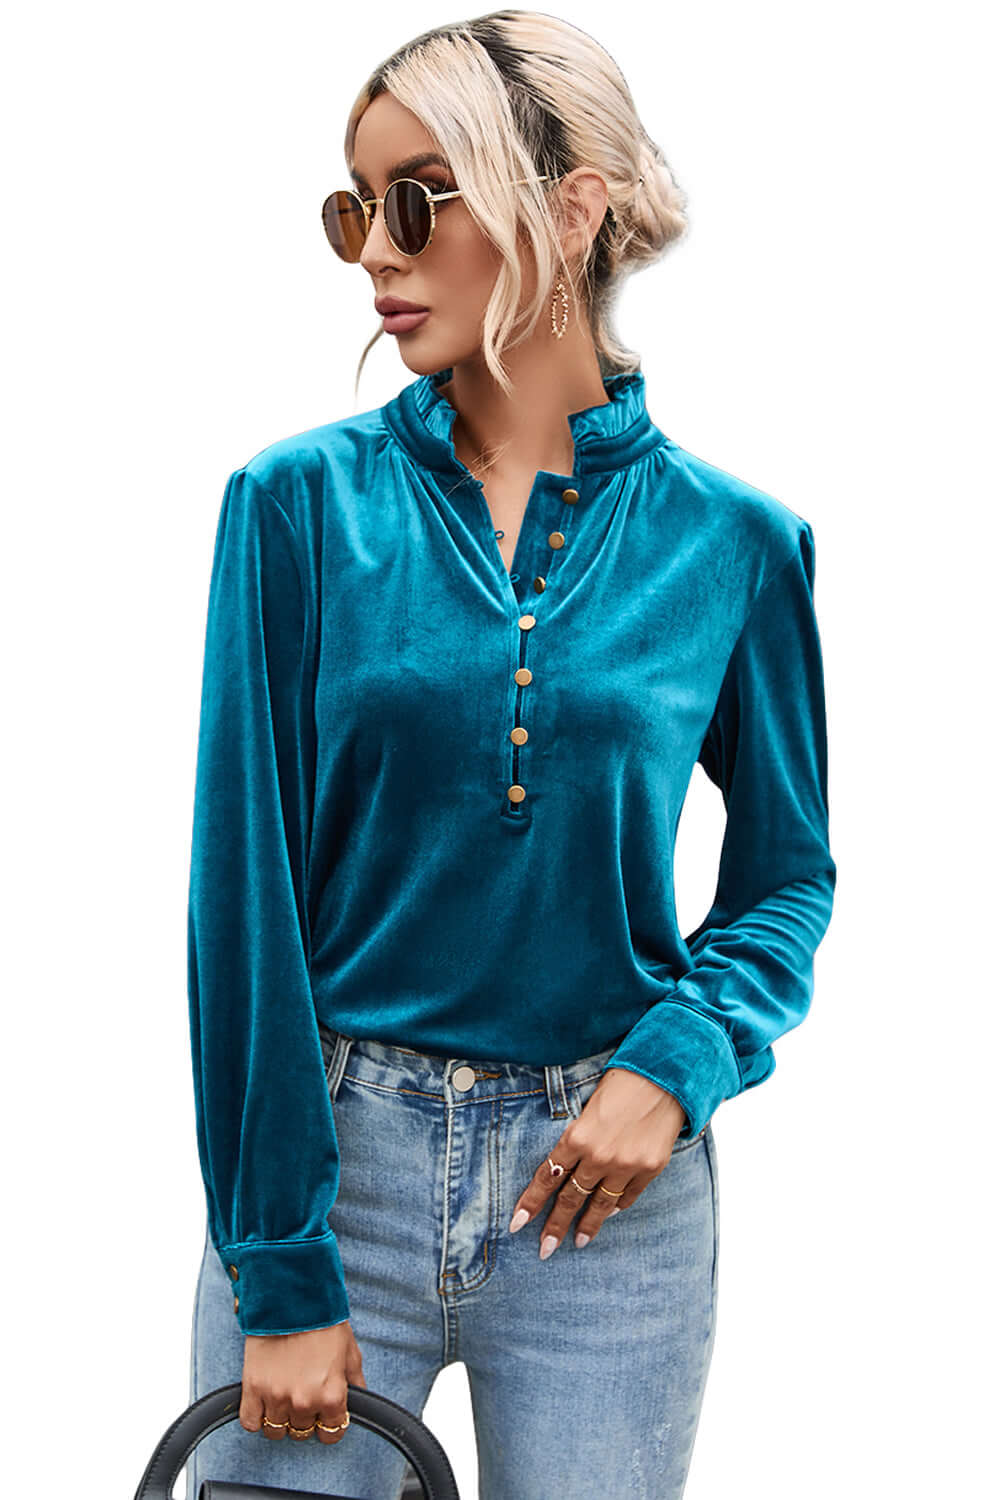 Green Frilled Neck Buttoned Front Velvet Top - Dixie Hike & Style